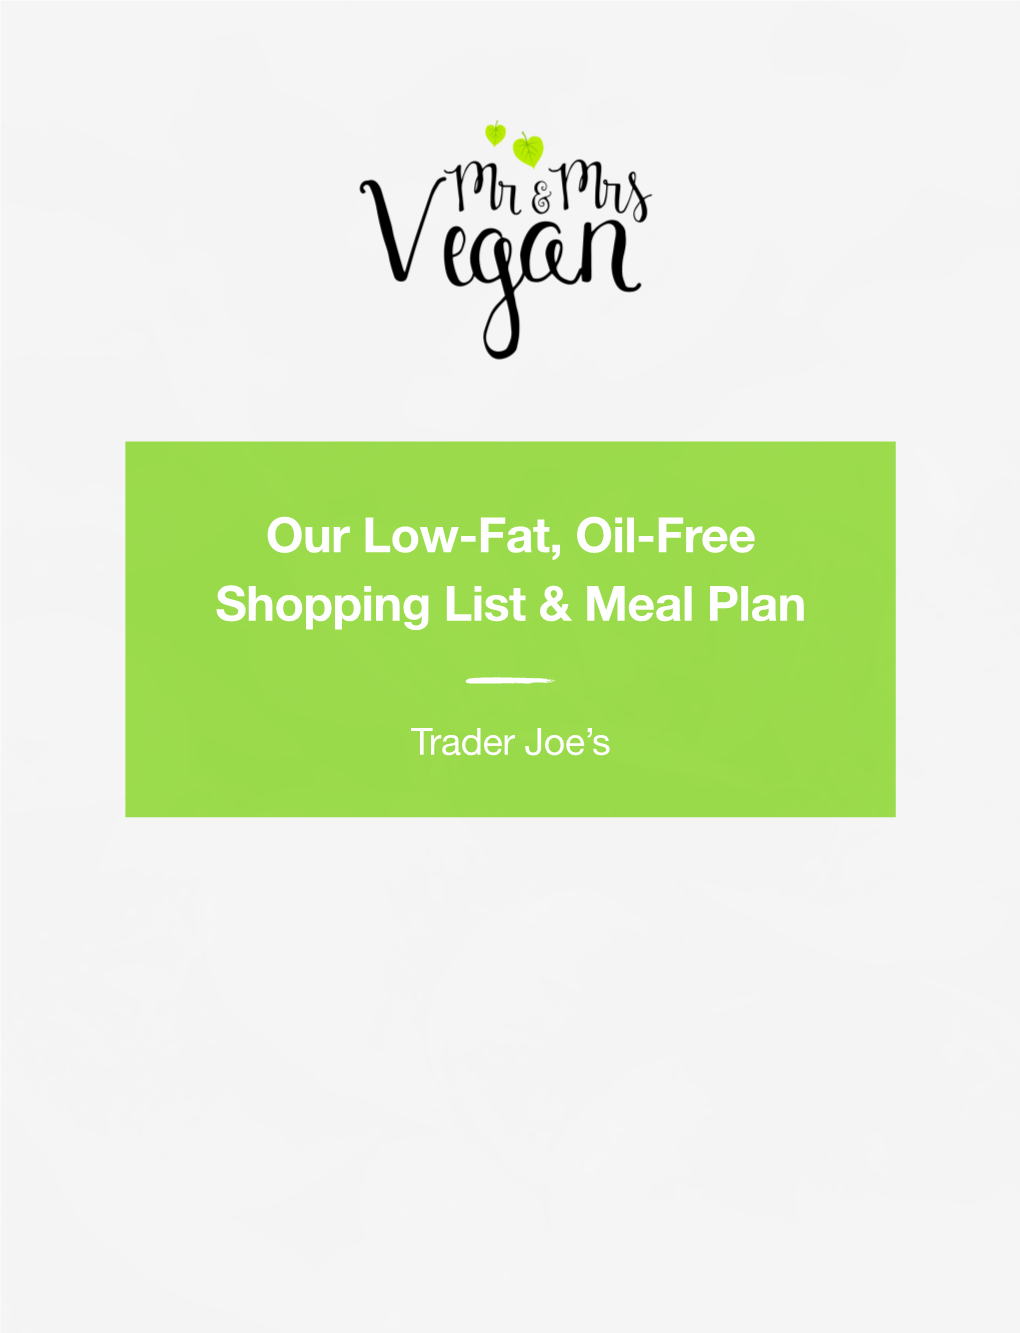 Our Low-Fat, Oil-Free Shopping List & Meal Plan